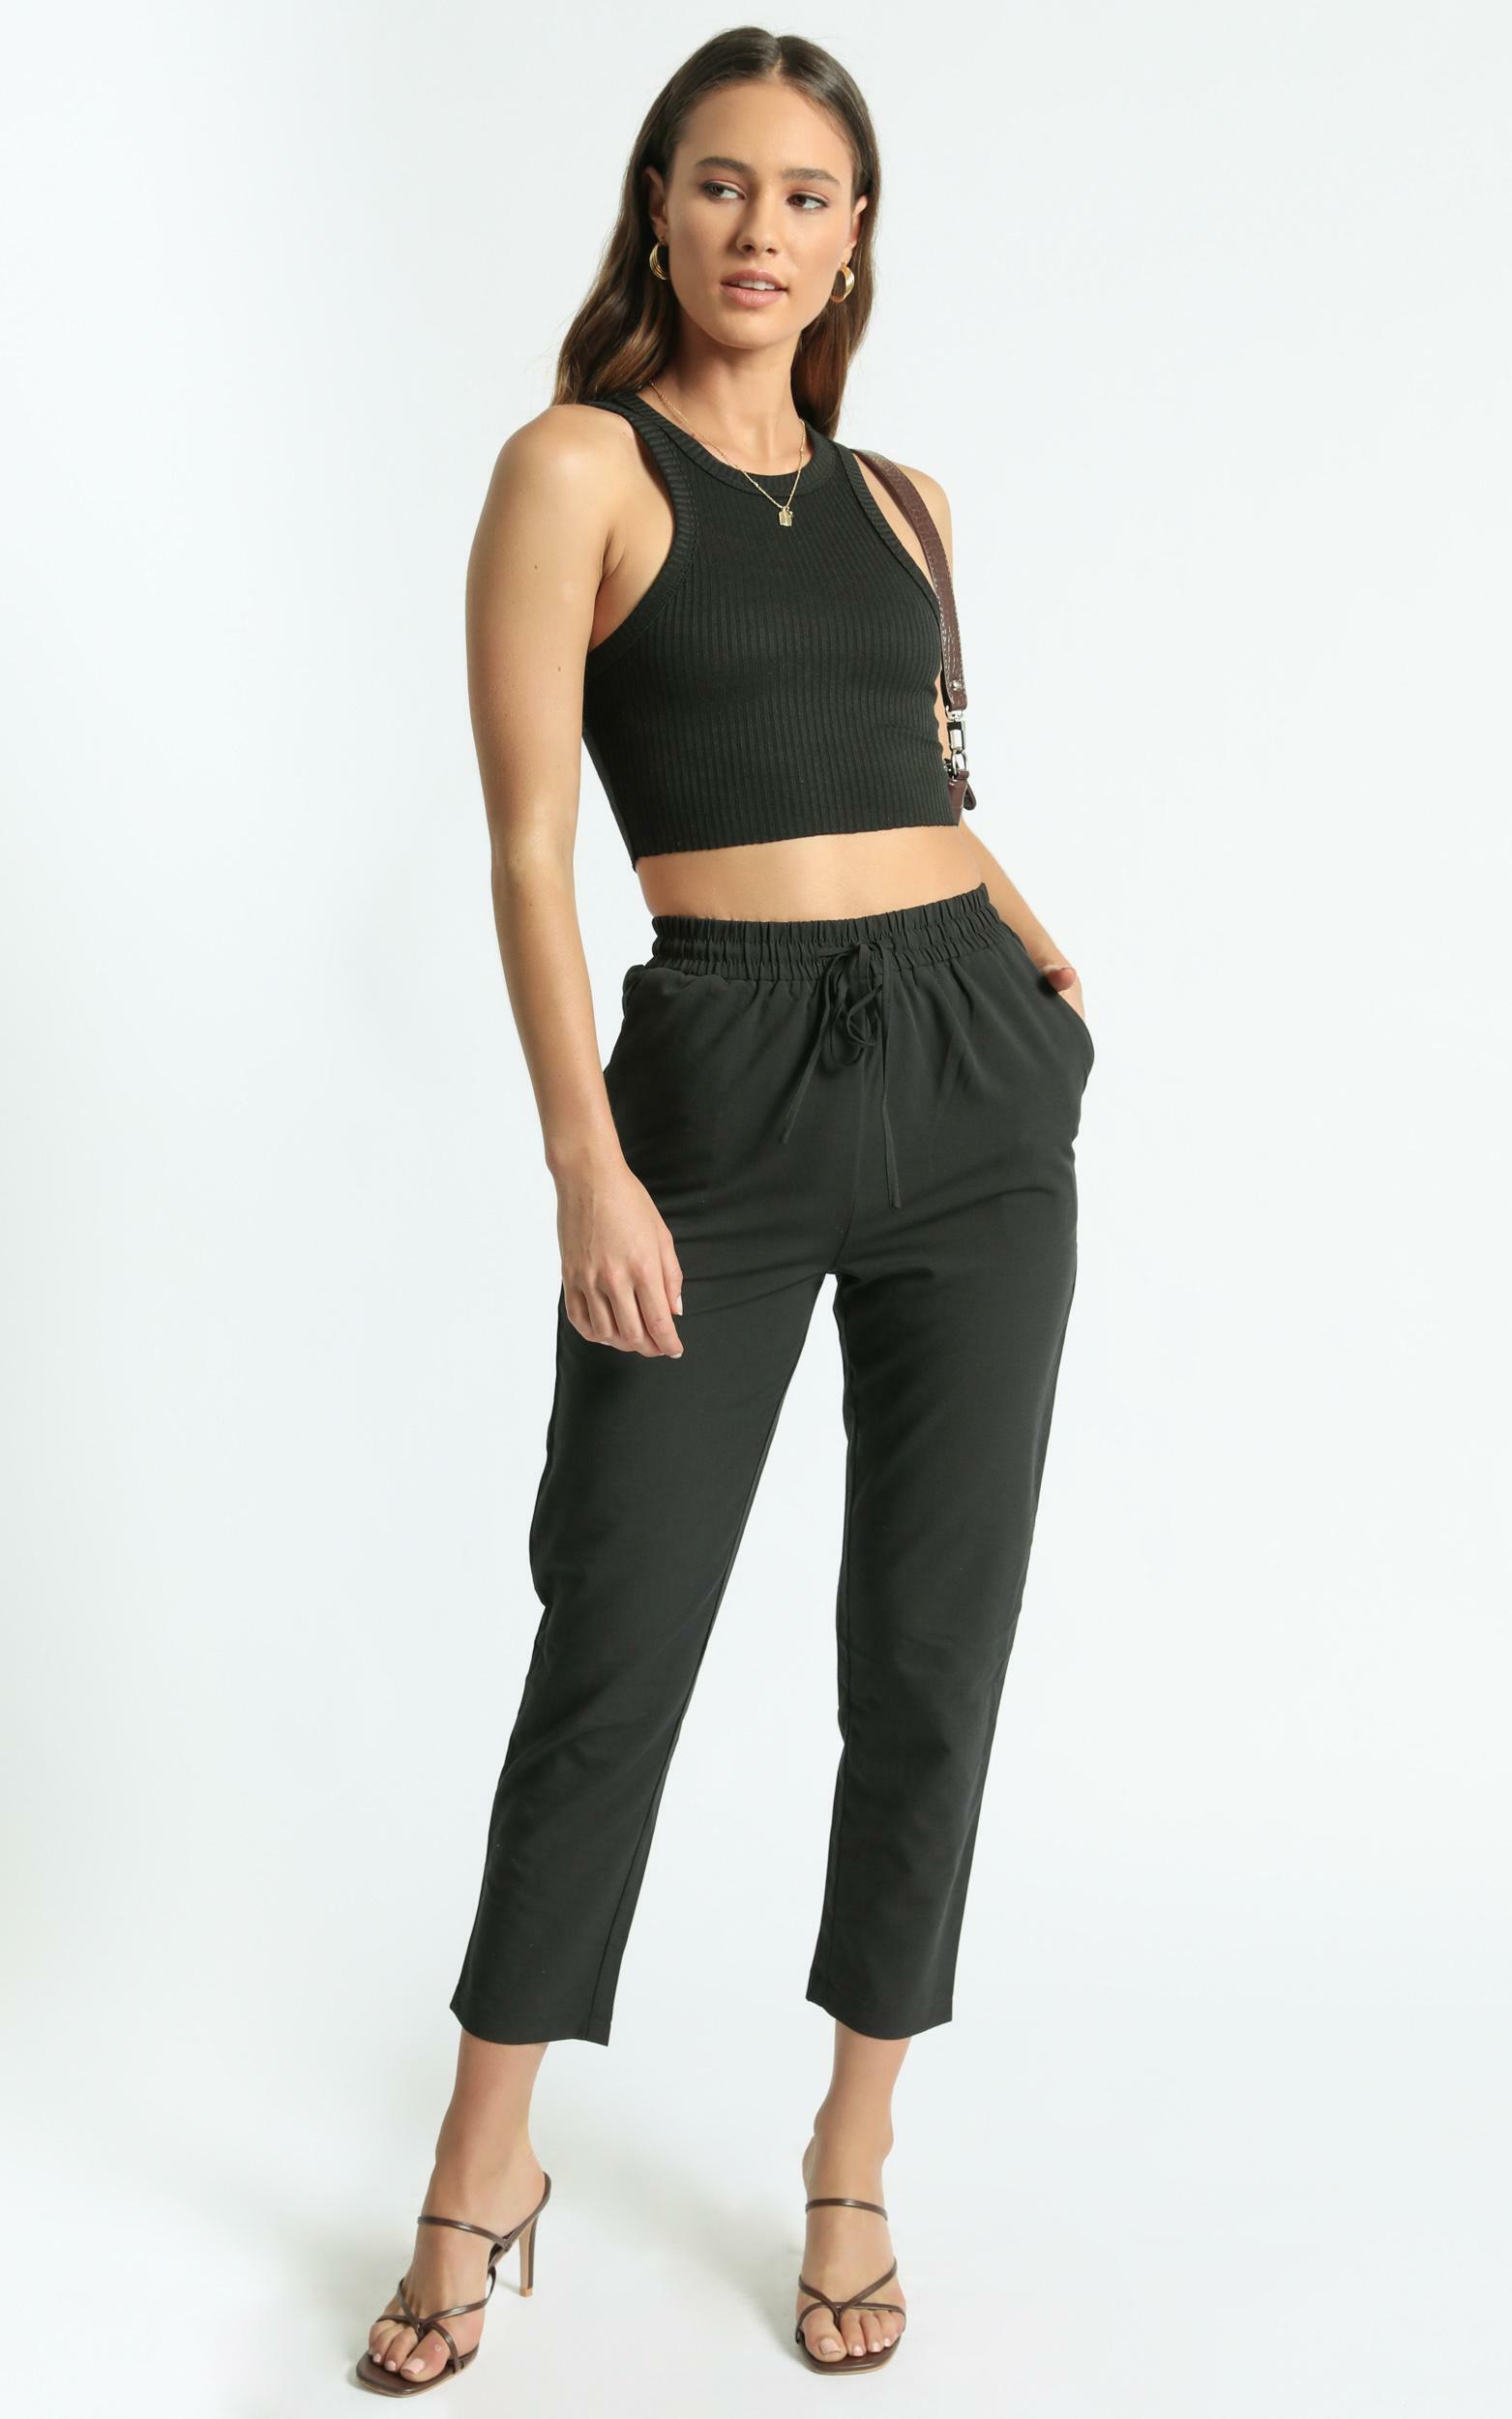 Hennessy Pants in Black - 6 (XS), Black, hi-res image number null